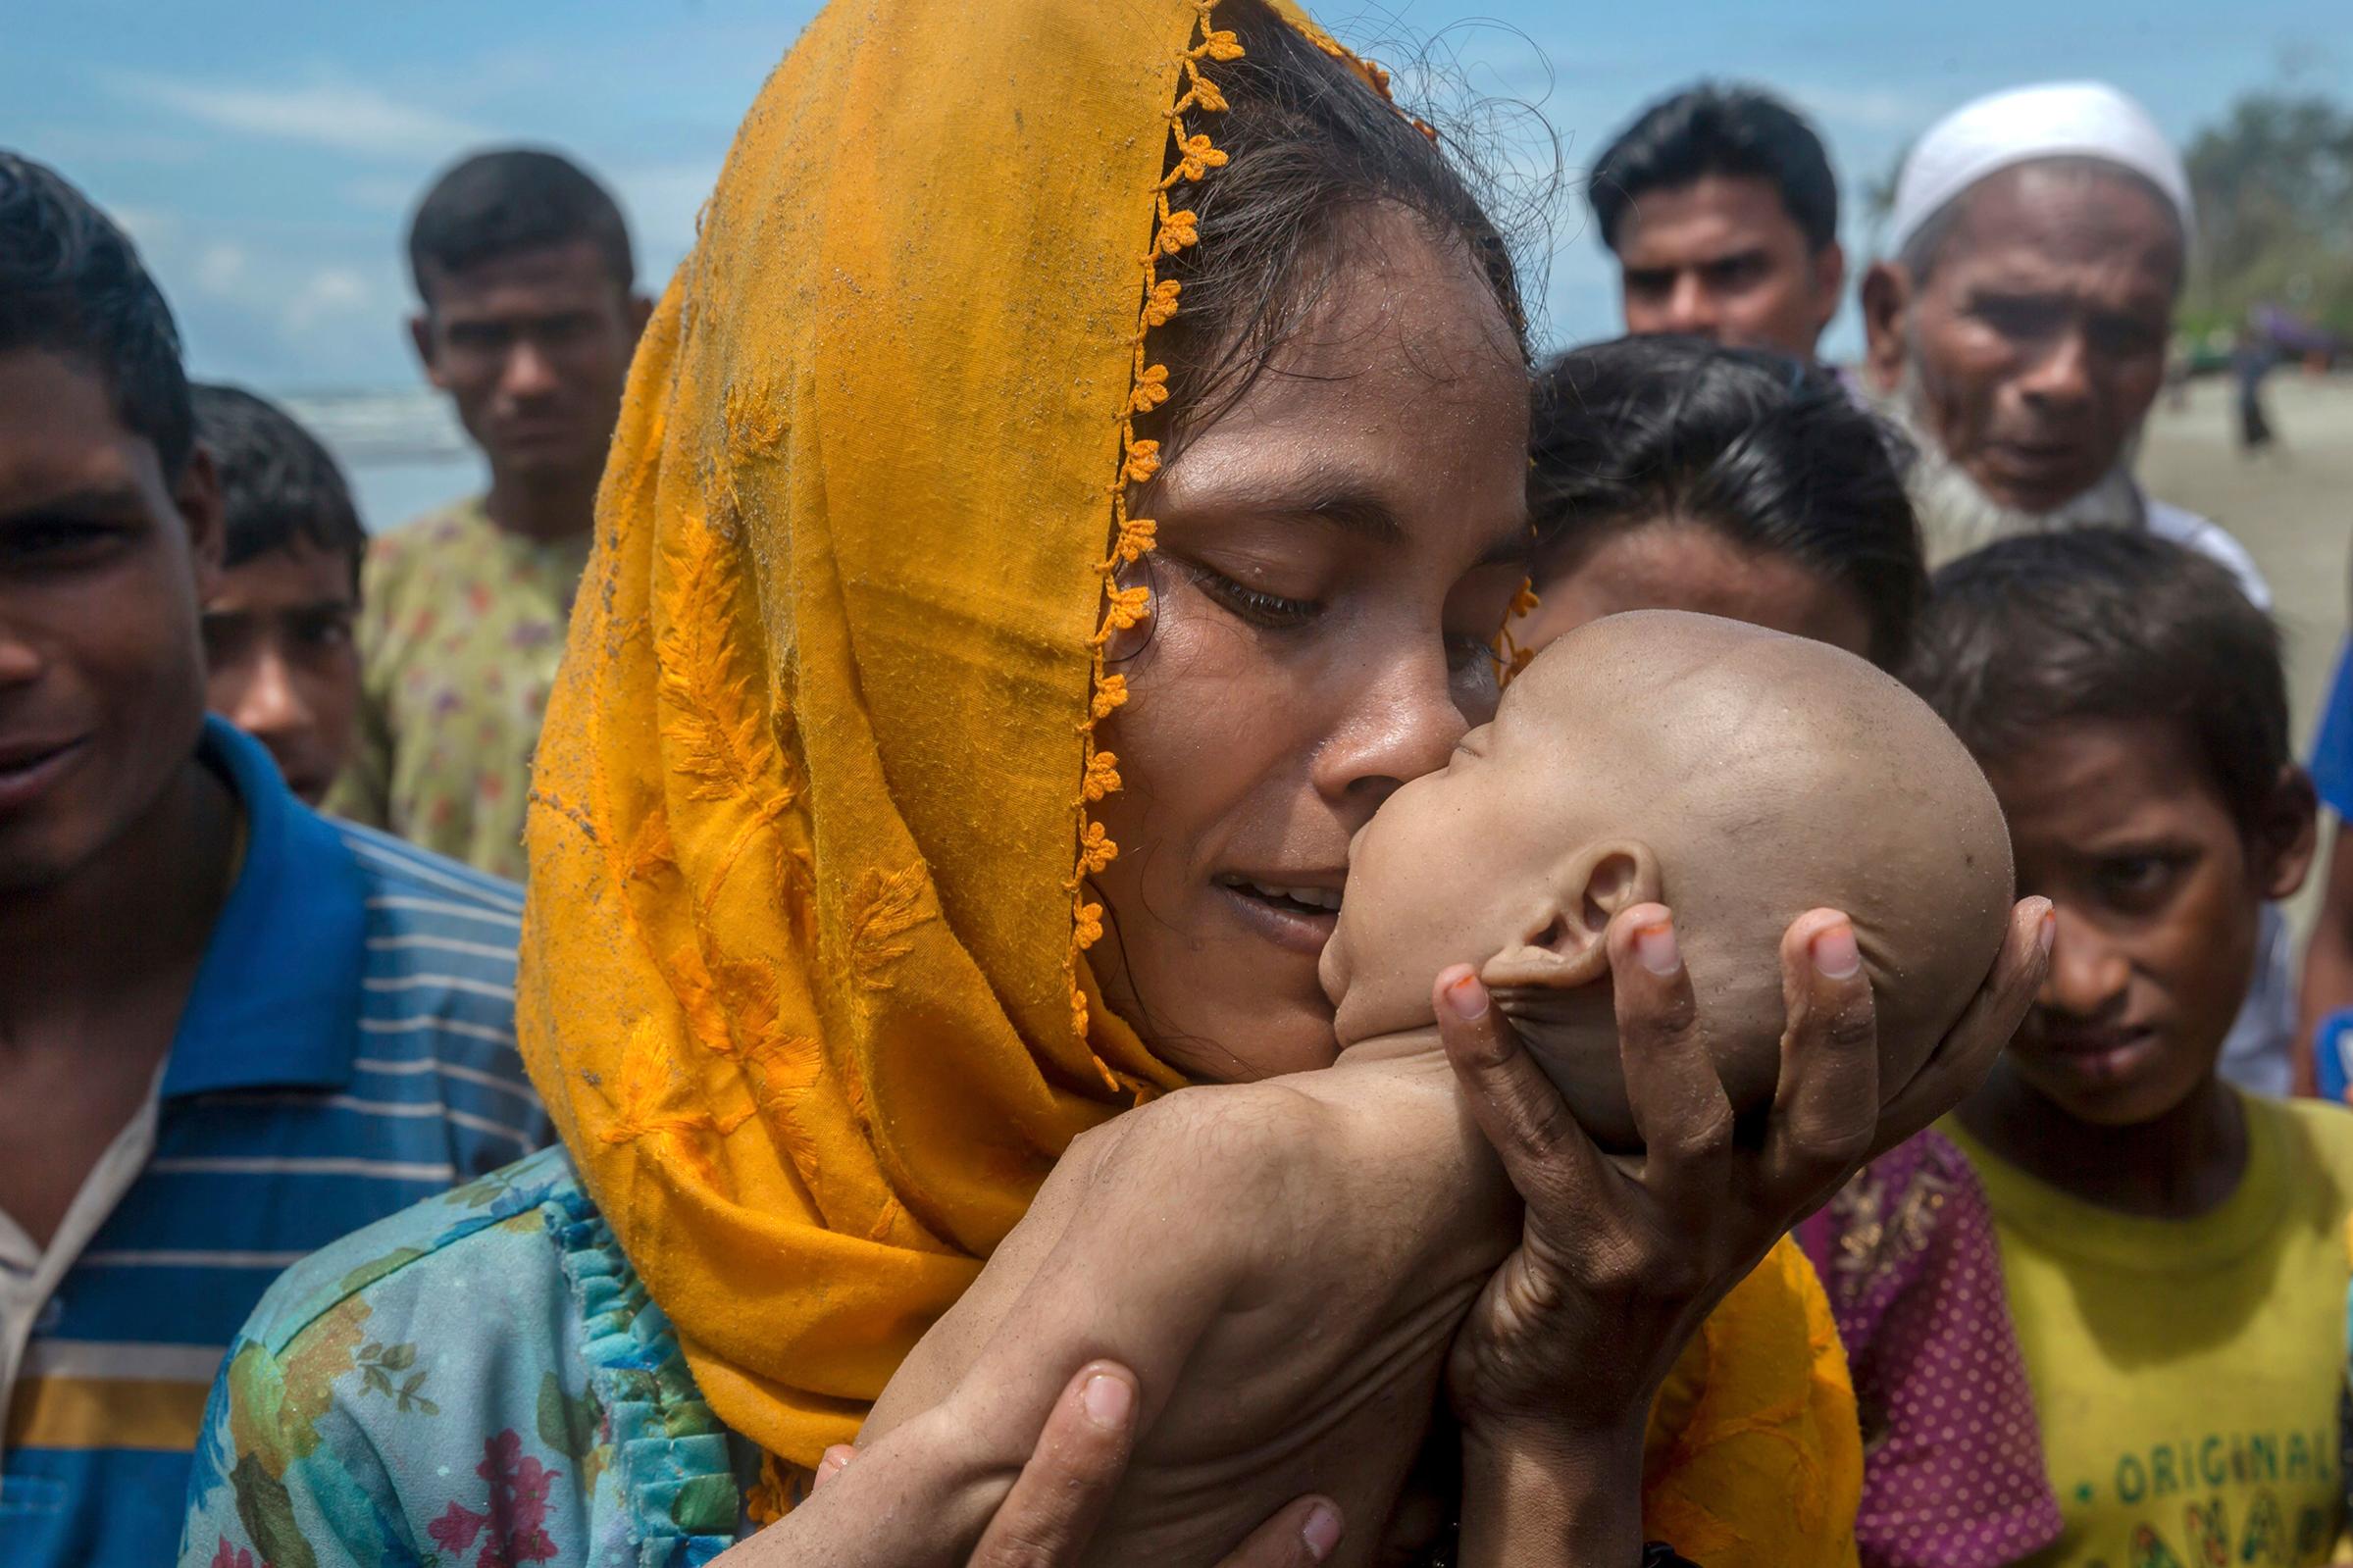 A Rohingya woman grieves for her infant son, who died when their boat capsized off Bangladesh on Sept. 14